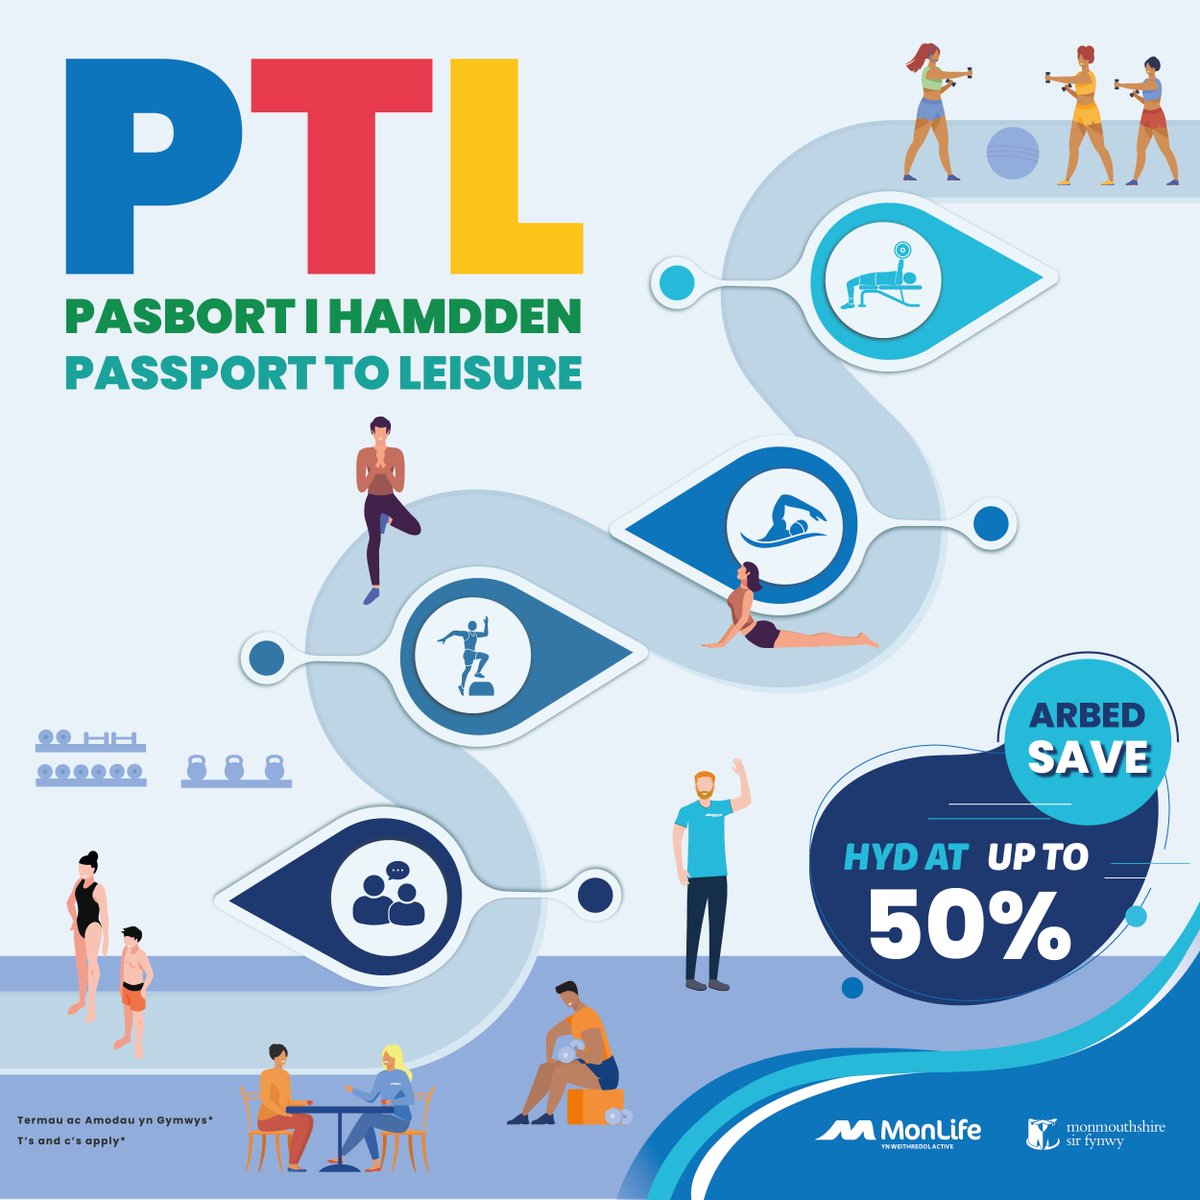 Our Passport to Leisure scheme offers flexible options to suit your lifestyle. Choose between convenient direct debit or pay-as-you-go options, helping make wellness accessible. *Terms and Conditions apply* Find out more: bit.ly/43zgqEZ